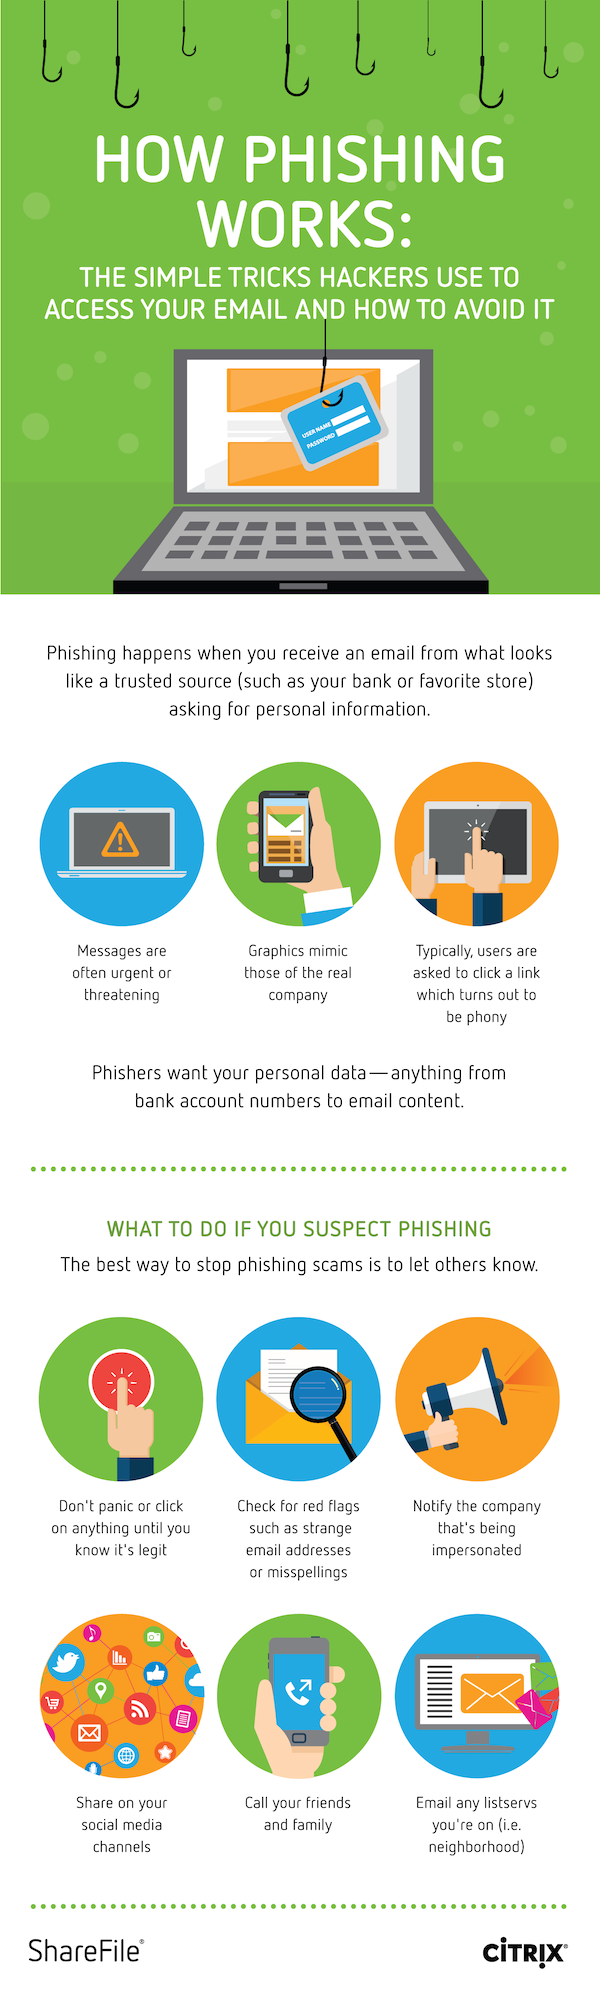 How Phishing Works and How to Avoid It